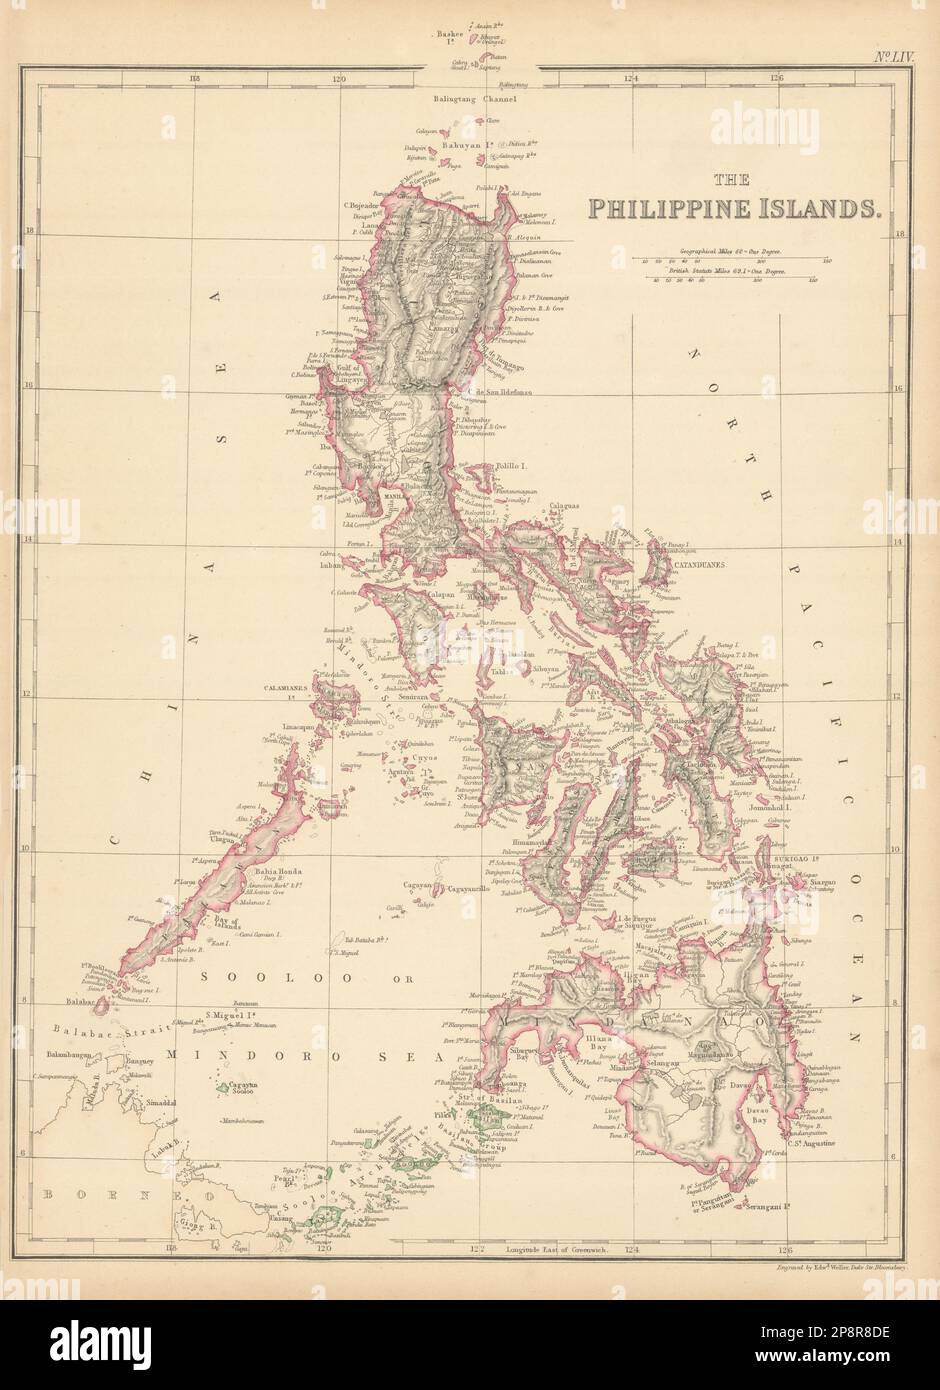 The Philippine Islands by Edward Weller. Philippines 1859 old antique map Stock Photo